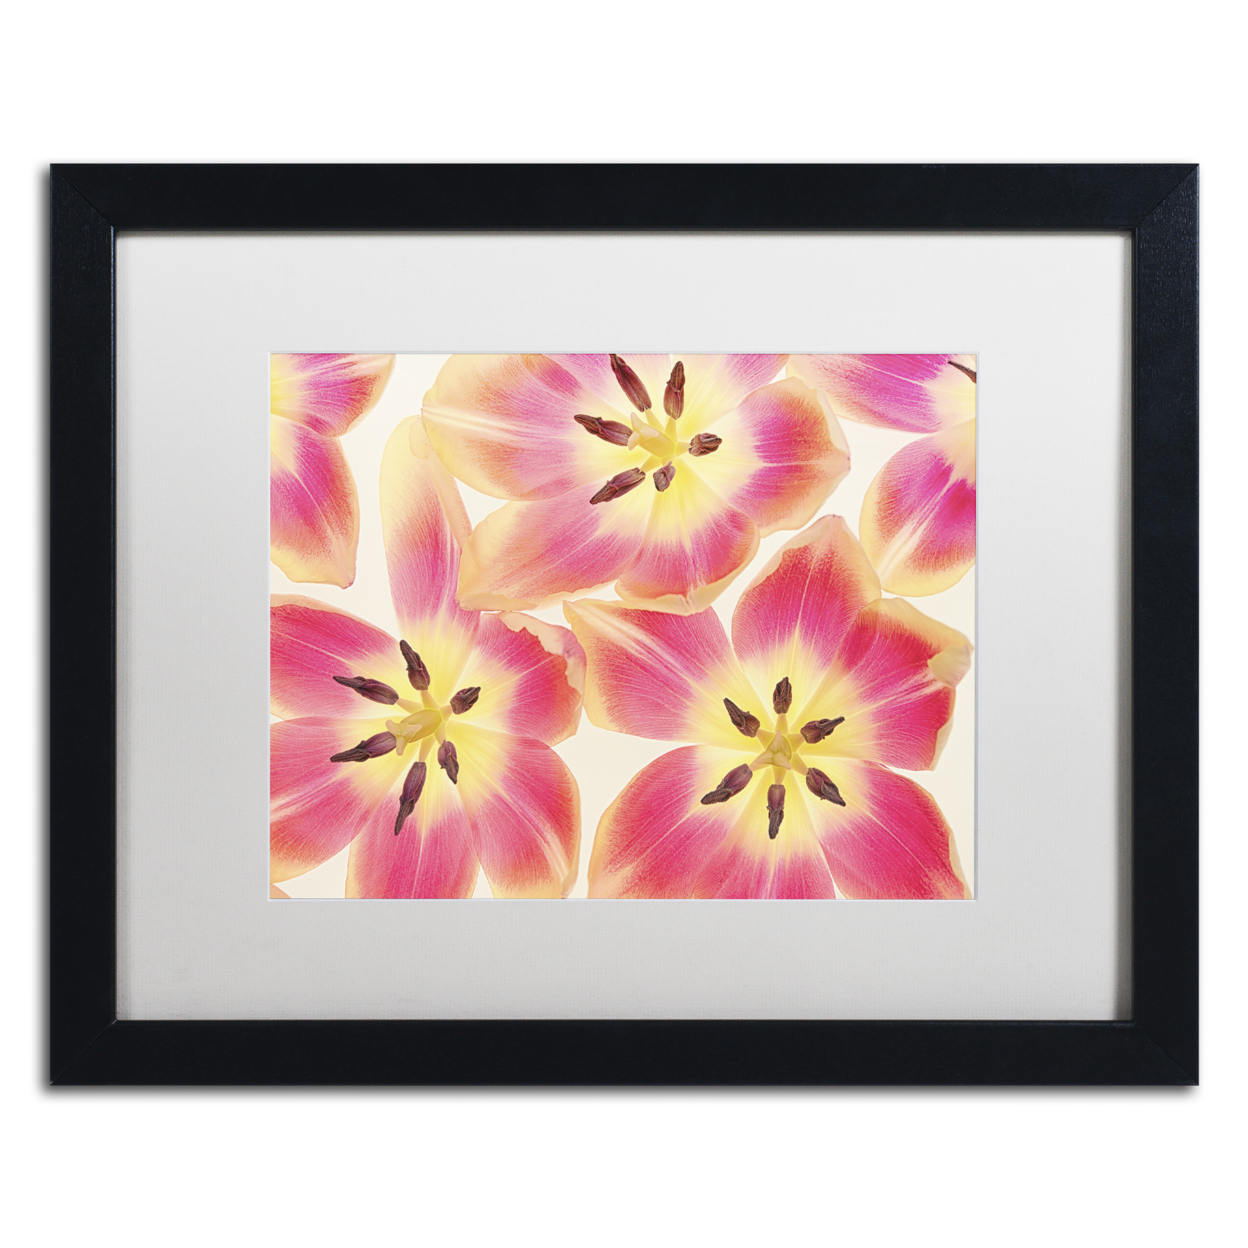 Cora Niele 'Cerise And Yellow Tulips' Black Wooden Framed Art 18 X 22 Inches